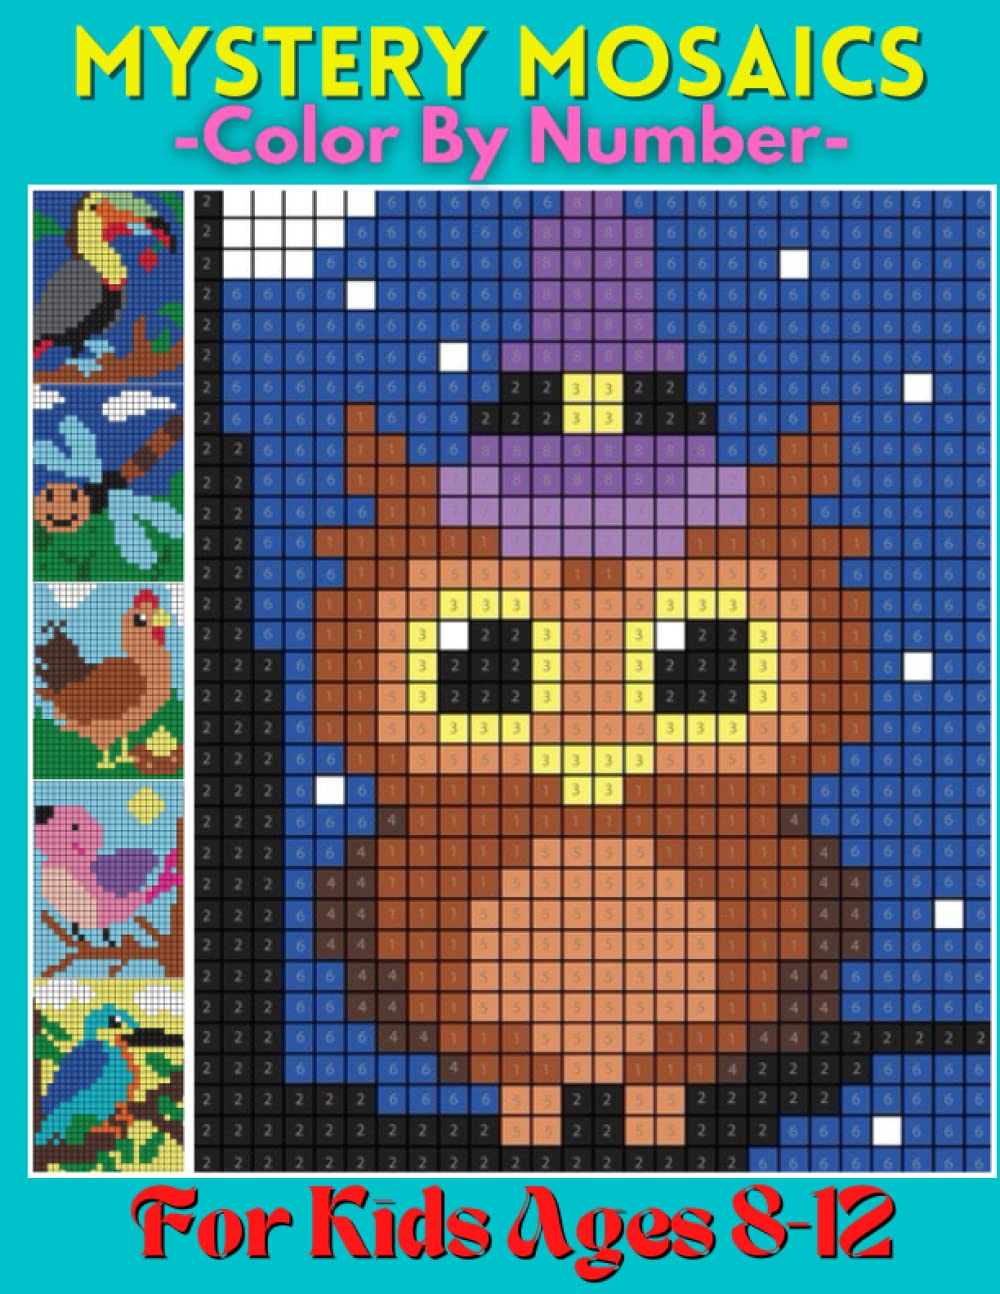 Mystery Mosaics Color By Number For Kids Ages 8-12: Coloring Book with Fun, Easy, and Relaxing Coloring Pages (Large Print Colour By Number Colouring Book)